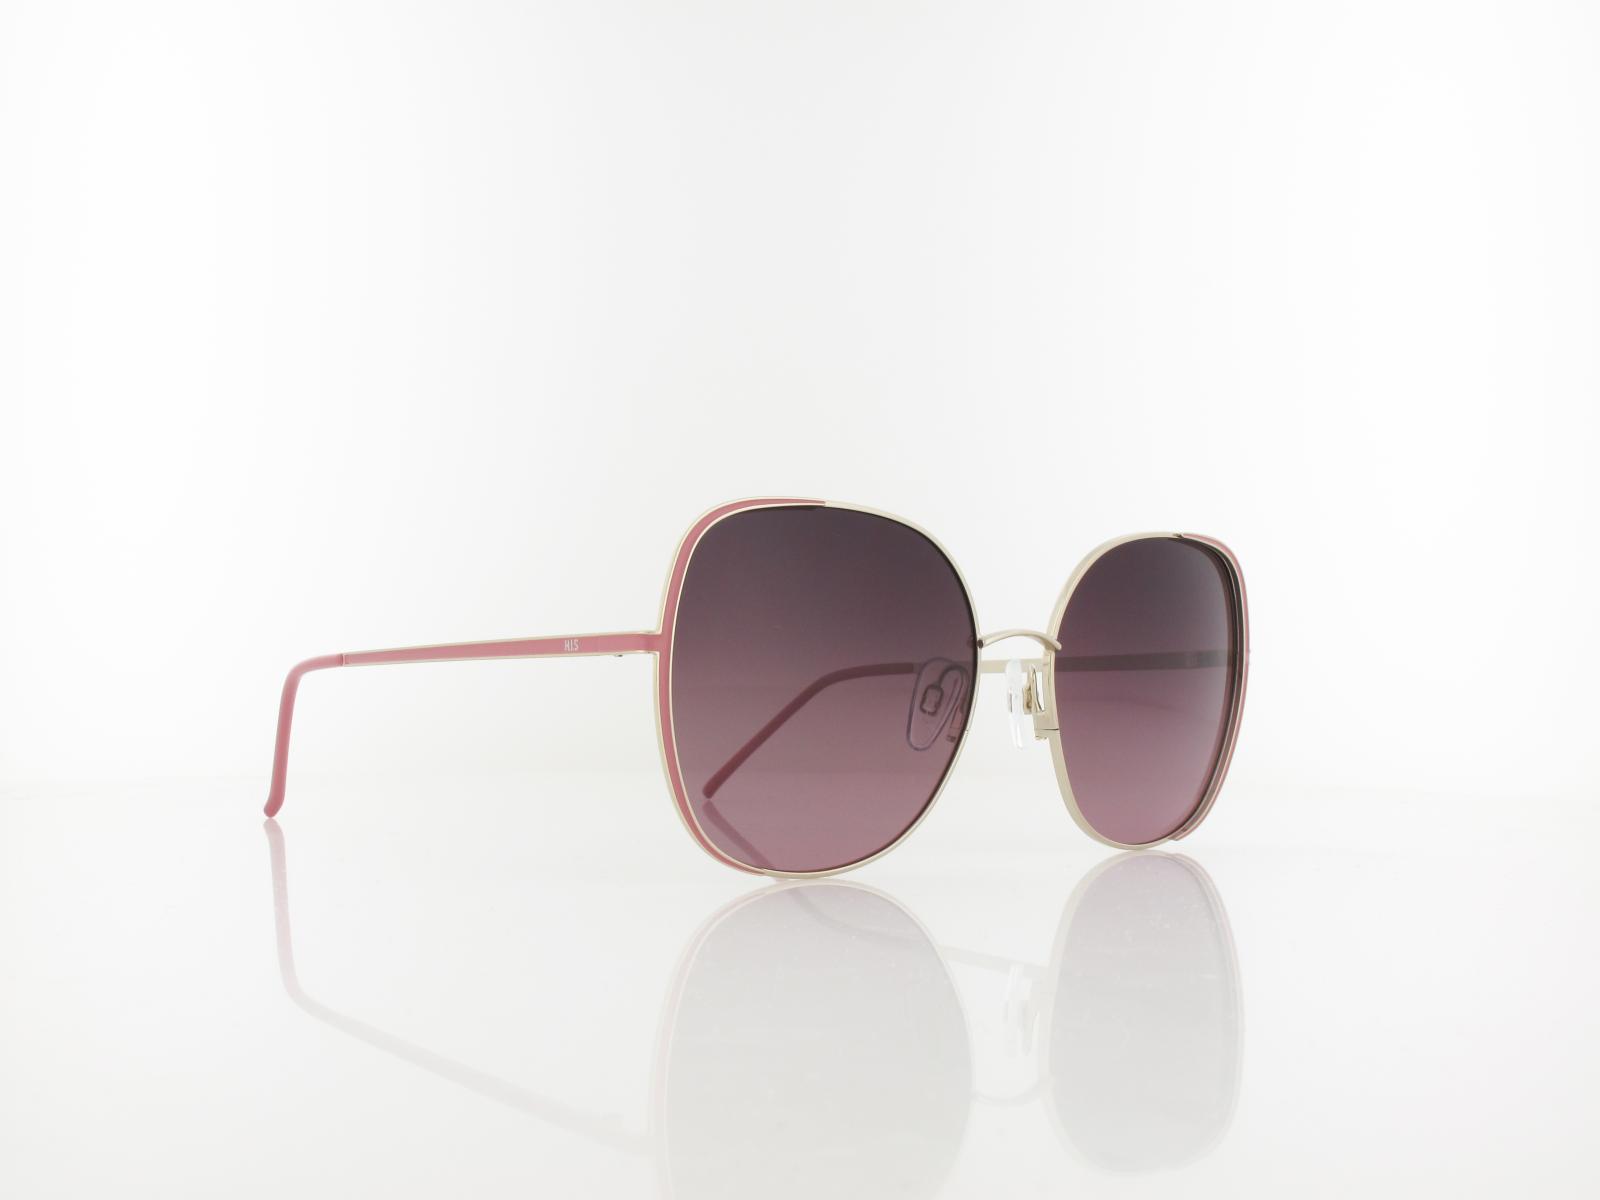 HIS polarized | HPS24105-3 57 | gold pink / rose gradient pol